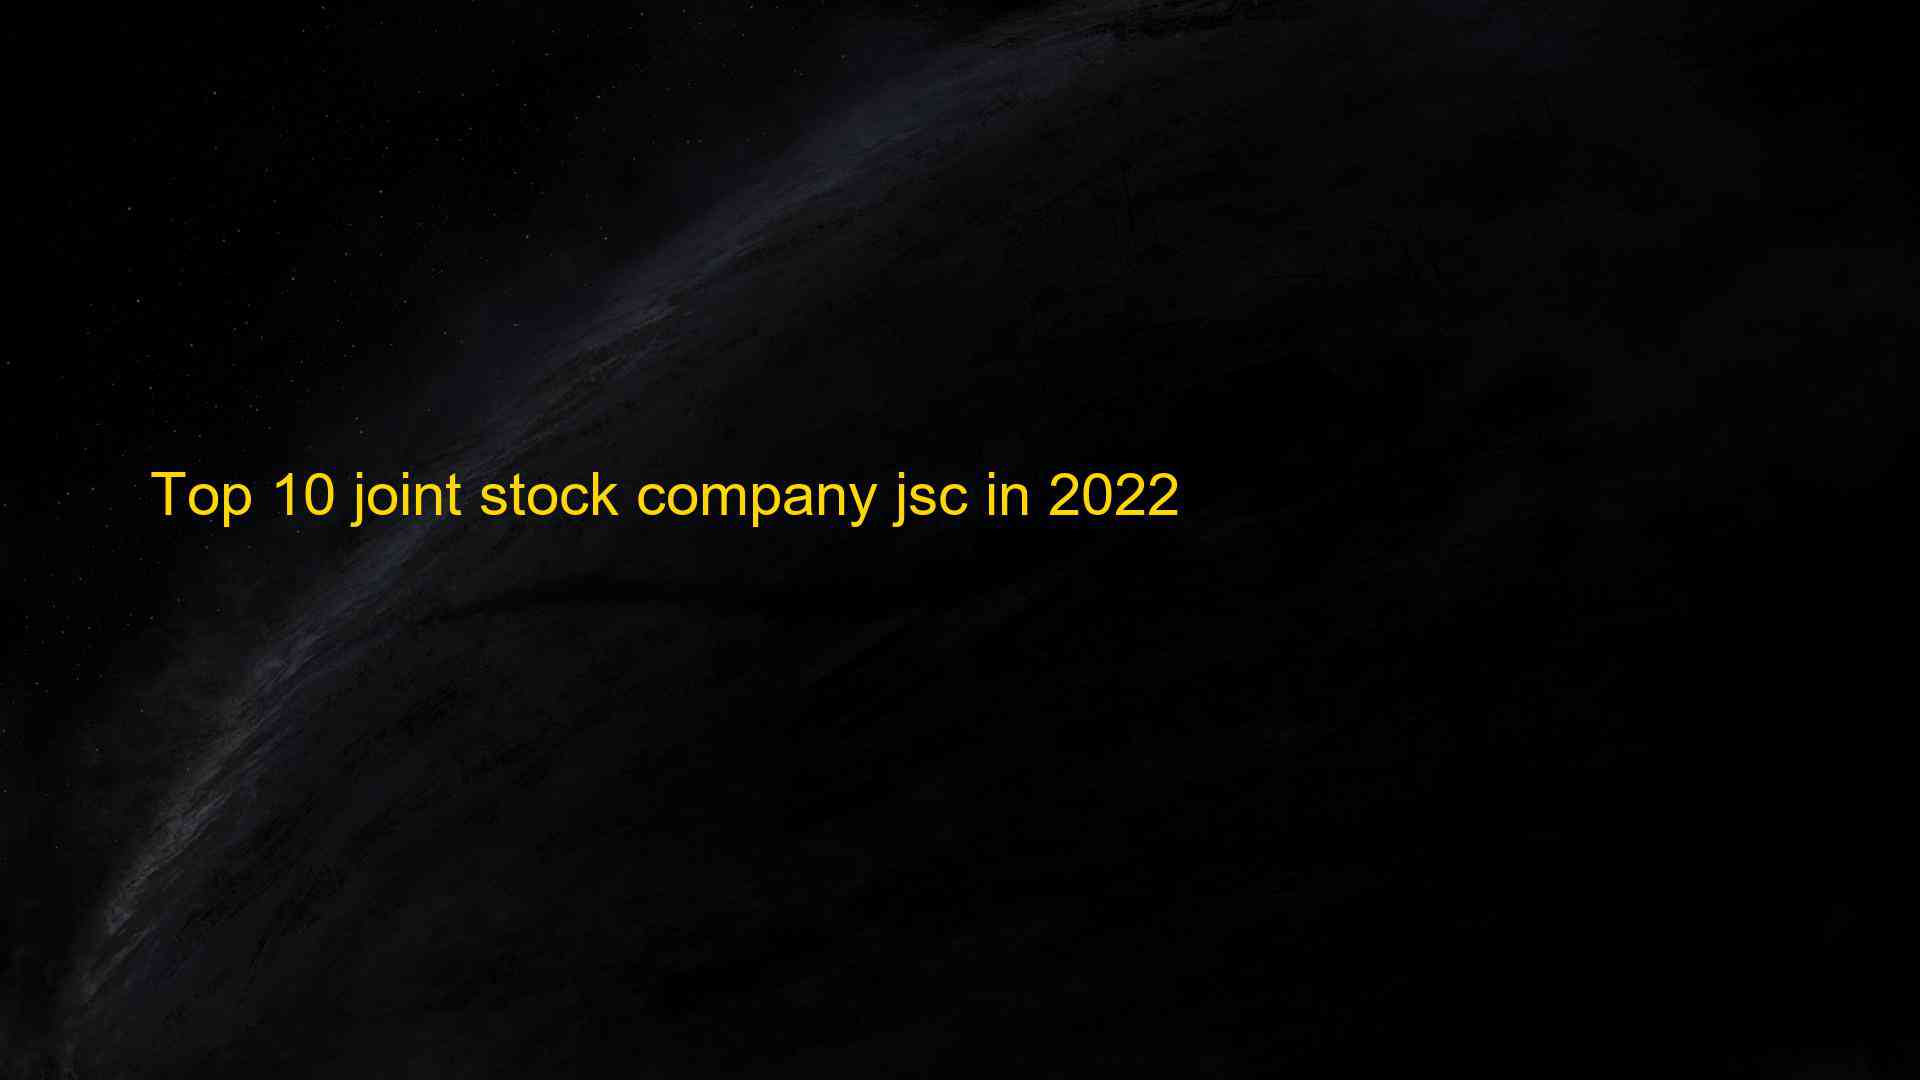 Top 10 joint stock company jsc in 2022 1660083775